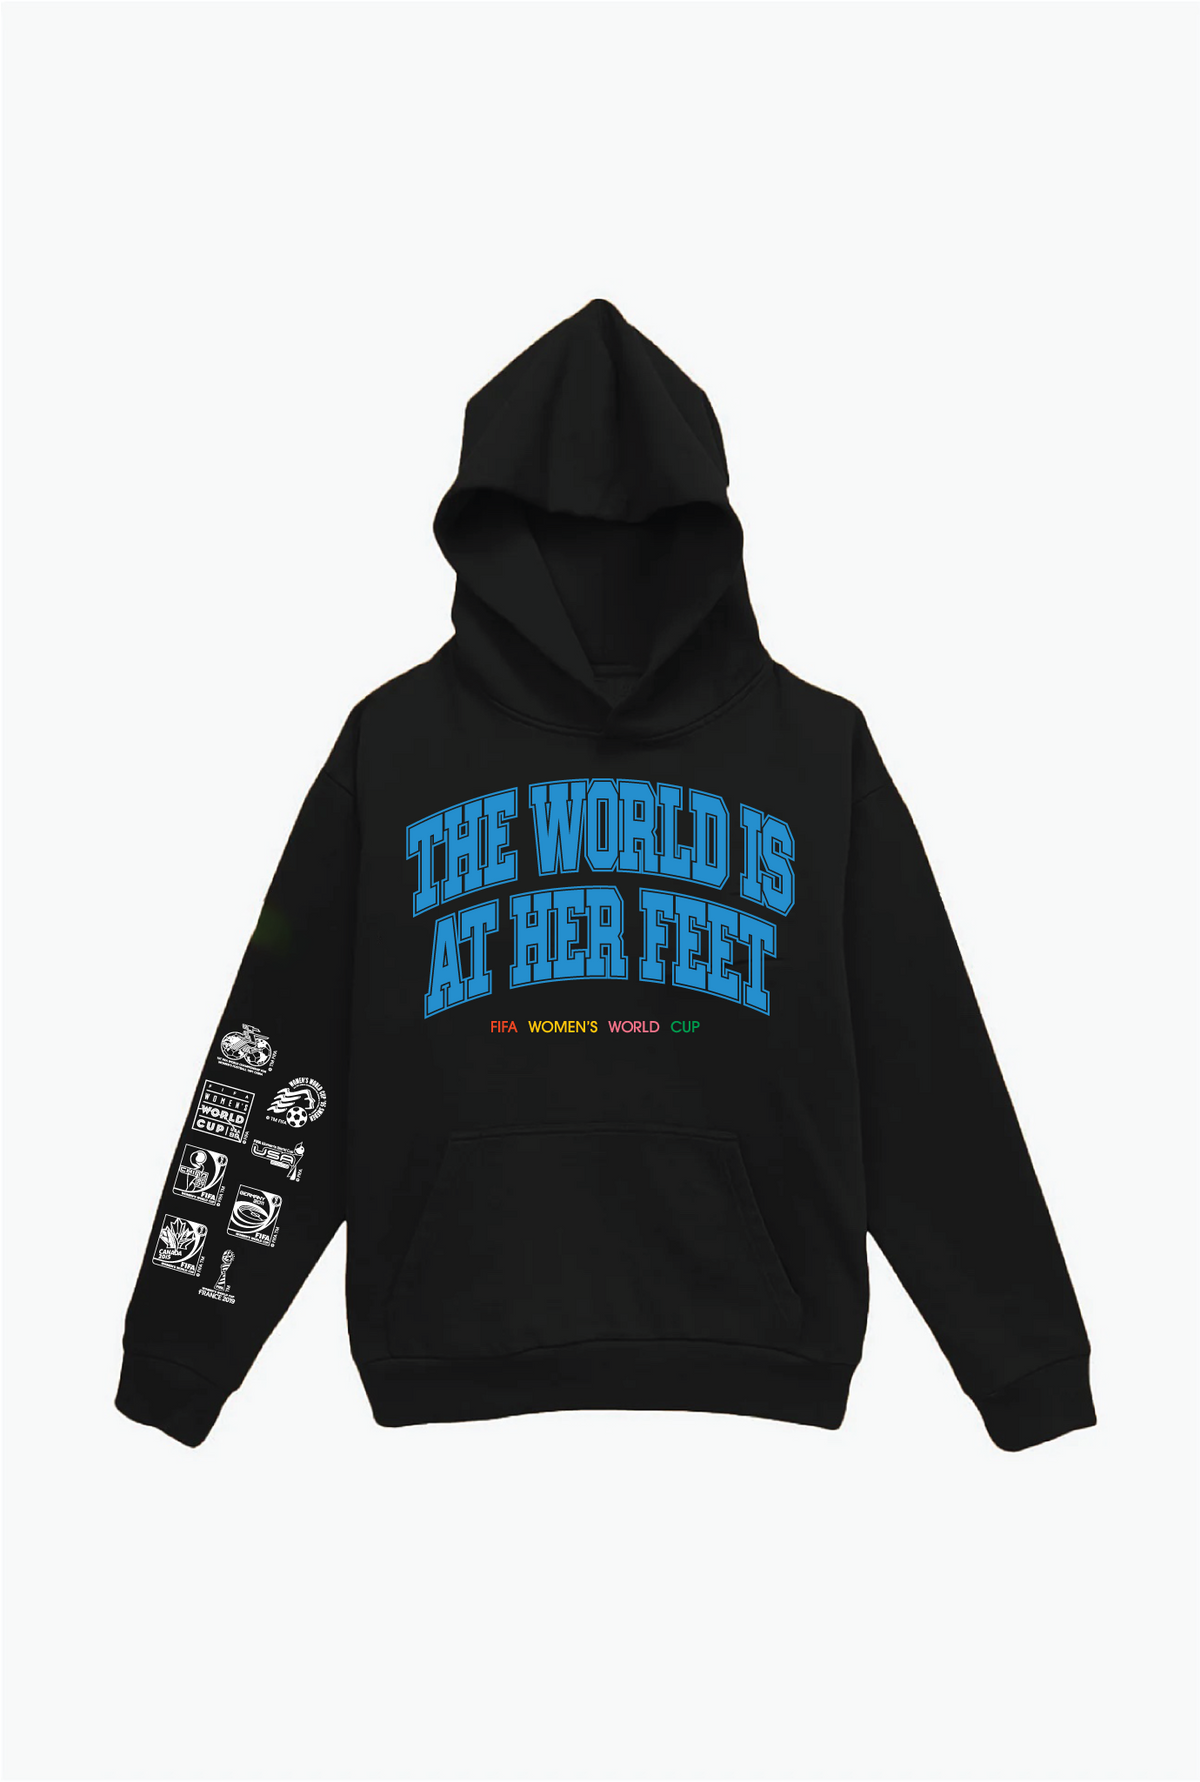 The World is at Her Feet Heavyweight Hoodie - Black